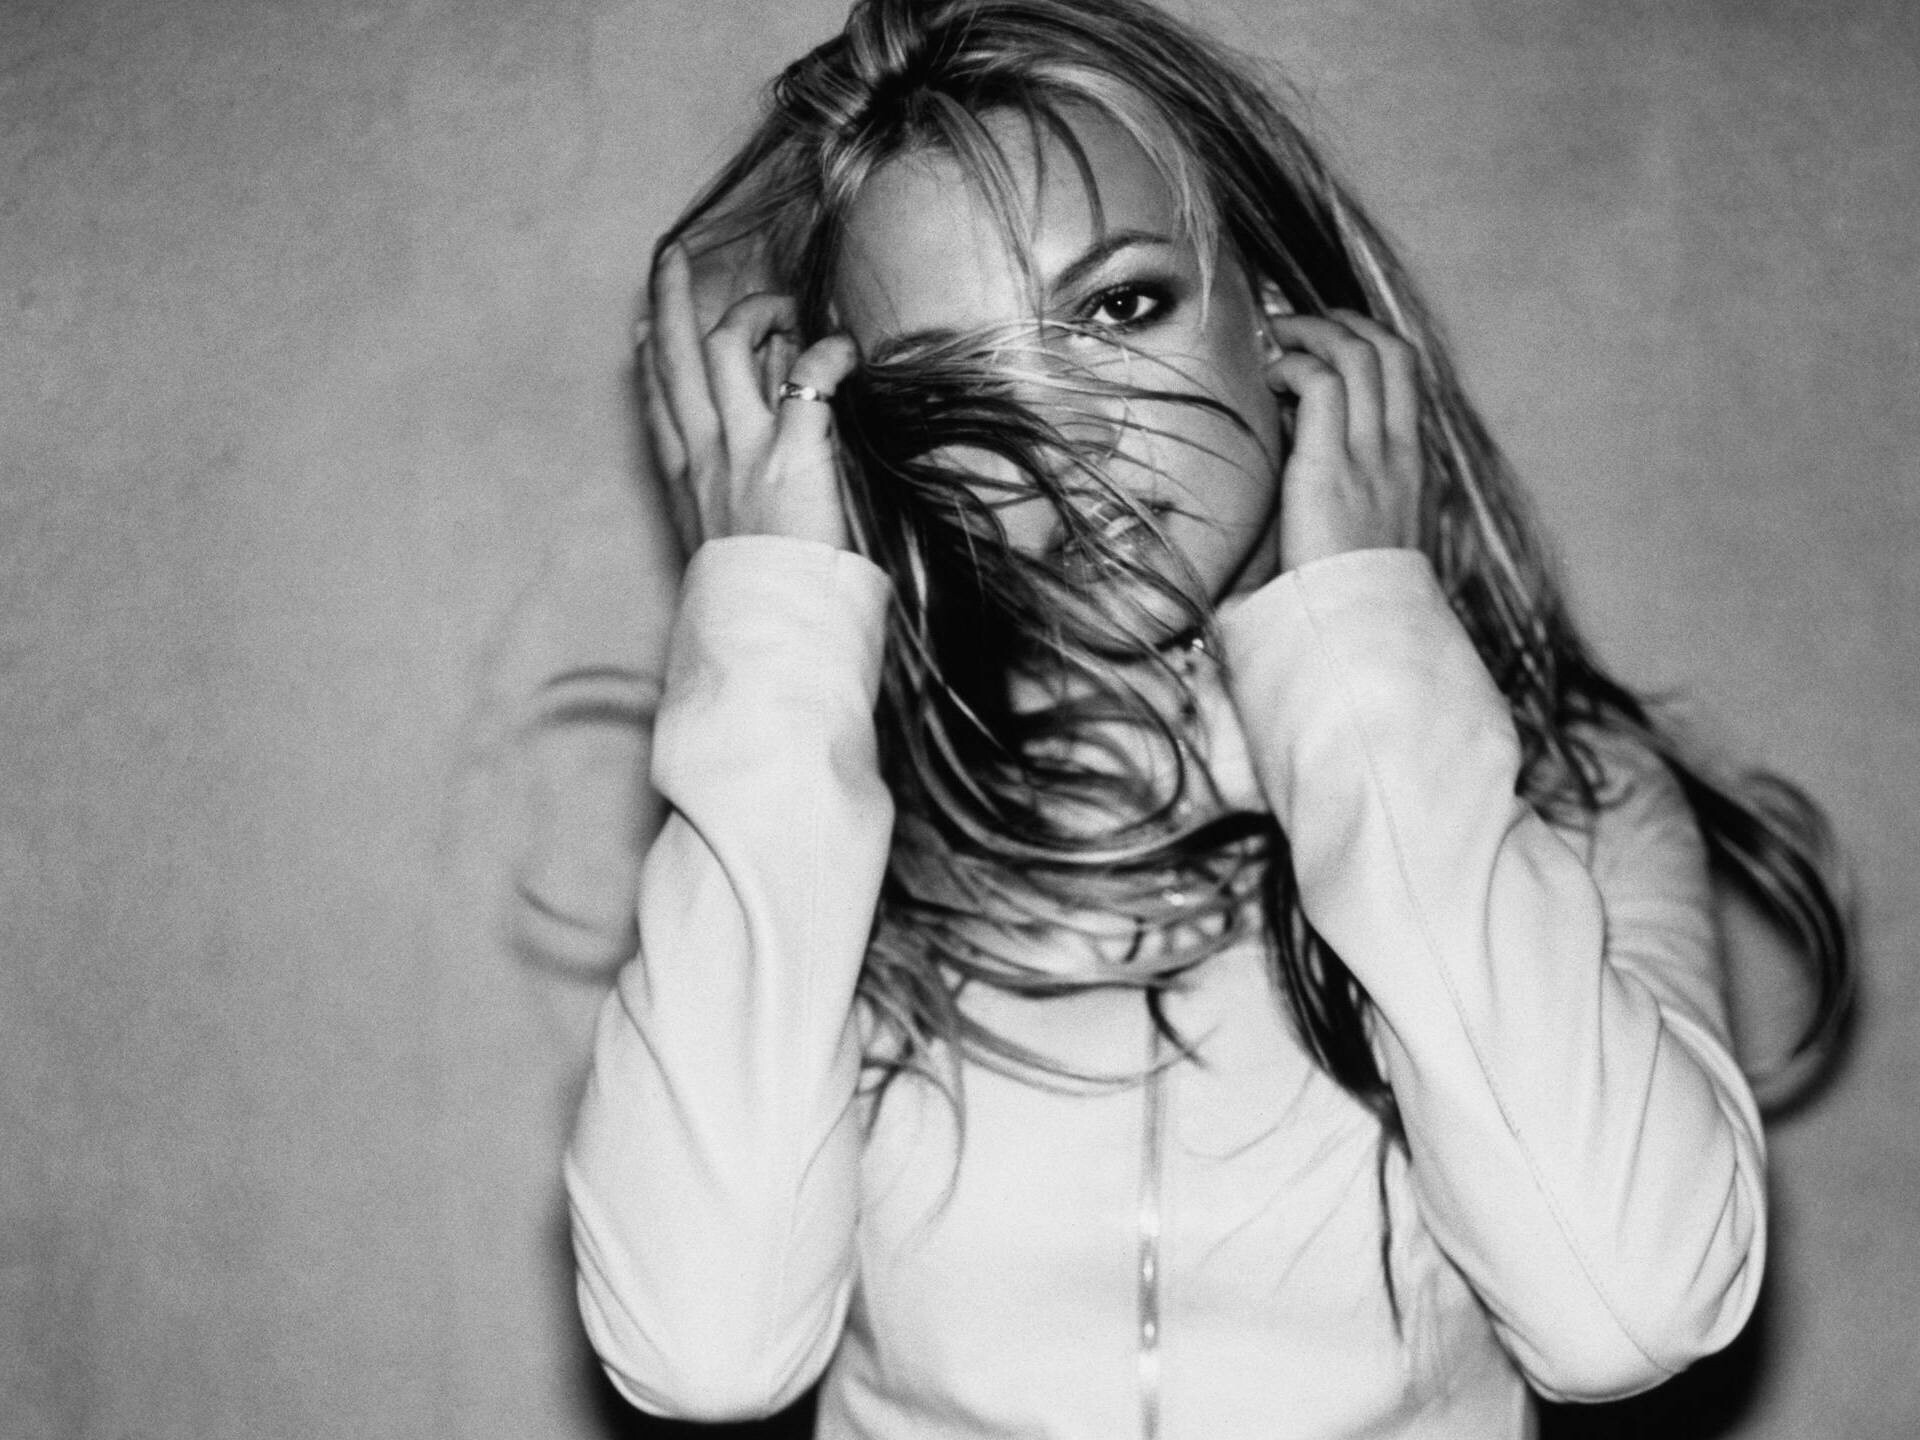 Britney Spears: Released her first book, Britney Spears' Heart to Heart, 2000, Monochrome. 1920x1440 HD Wallpaper.